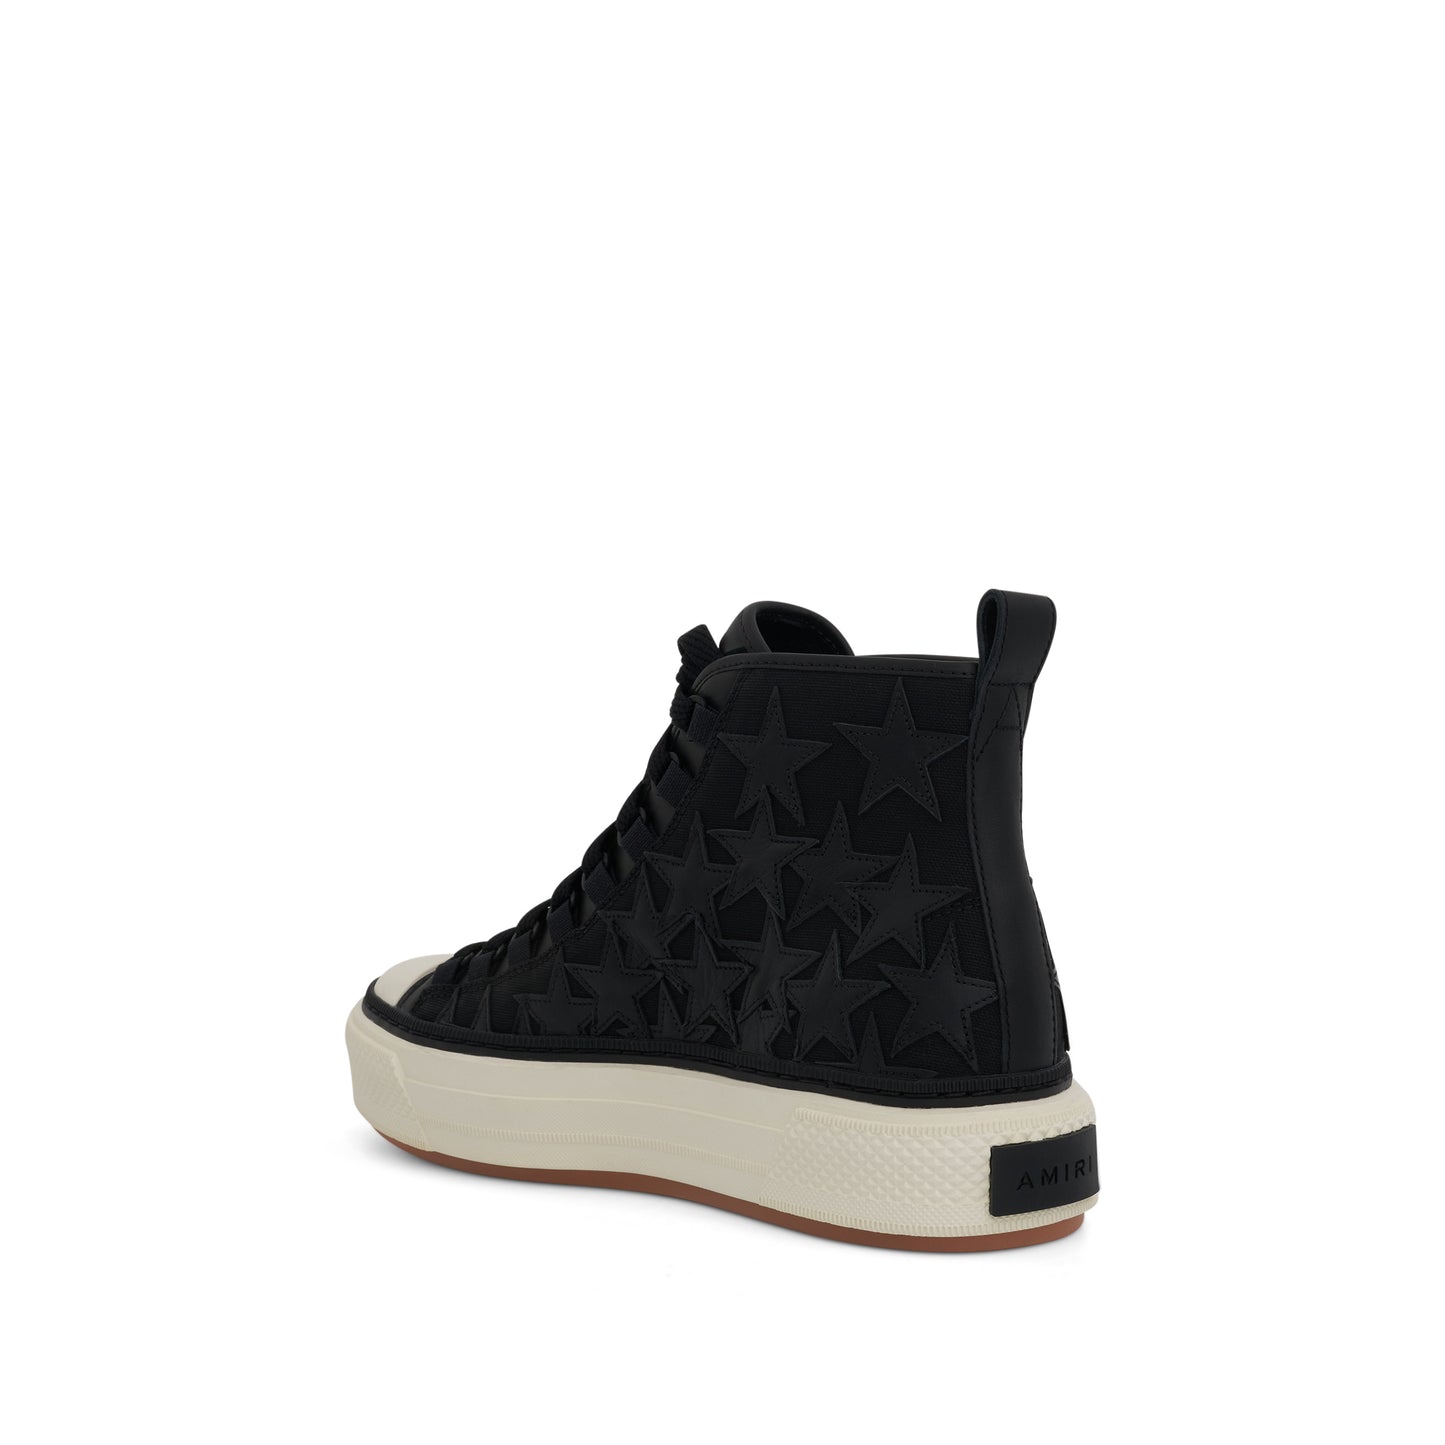 Stars High Court Sneakers in Black/White